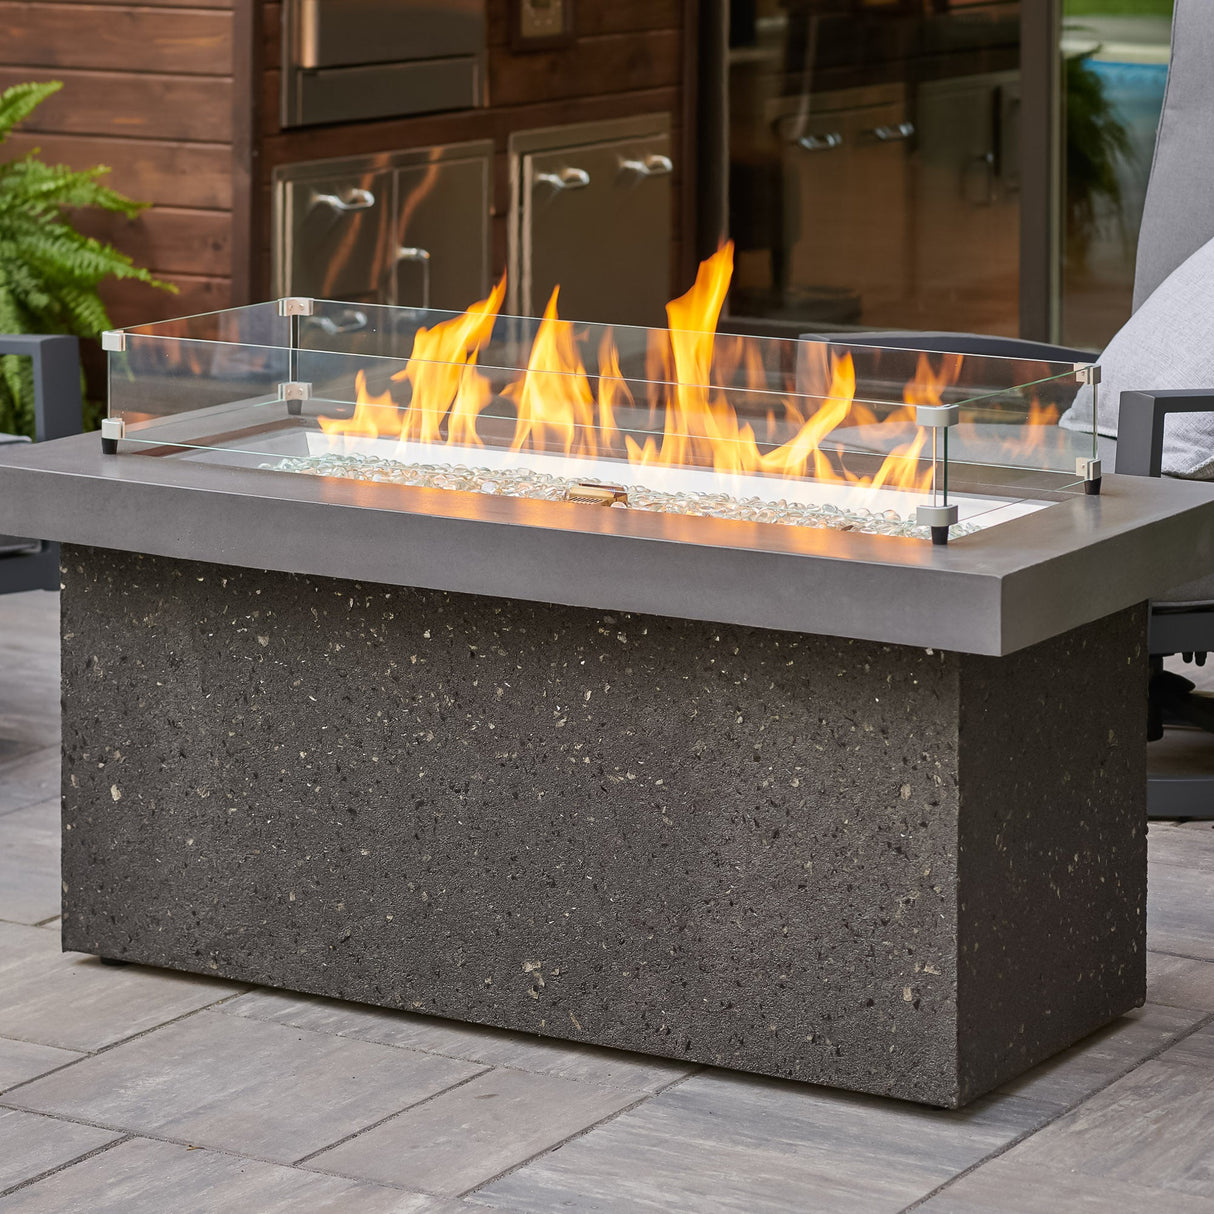 Close up of the Midnight Mist Key Largo Linear Gas Fire Pit Table with a glass wind guard being used to protect the flame